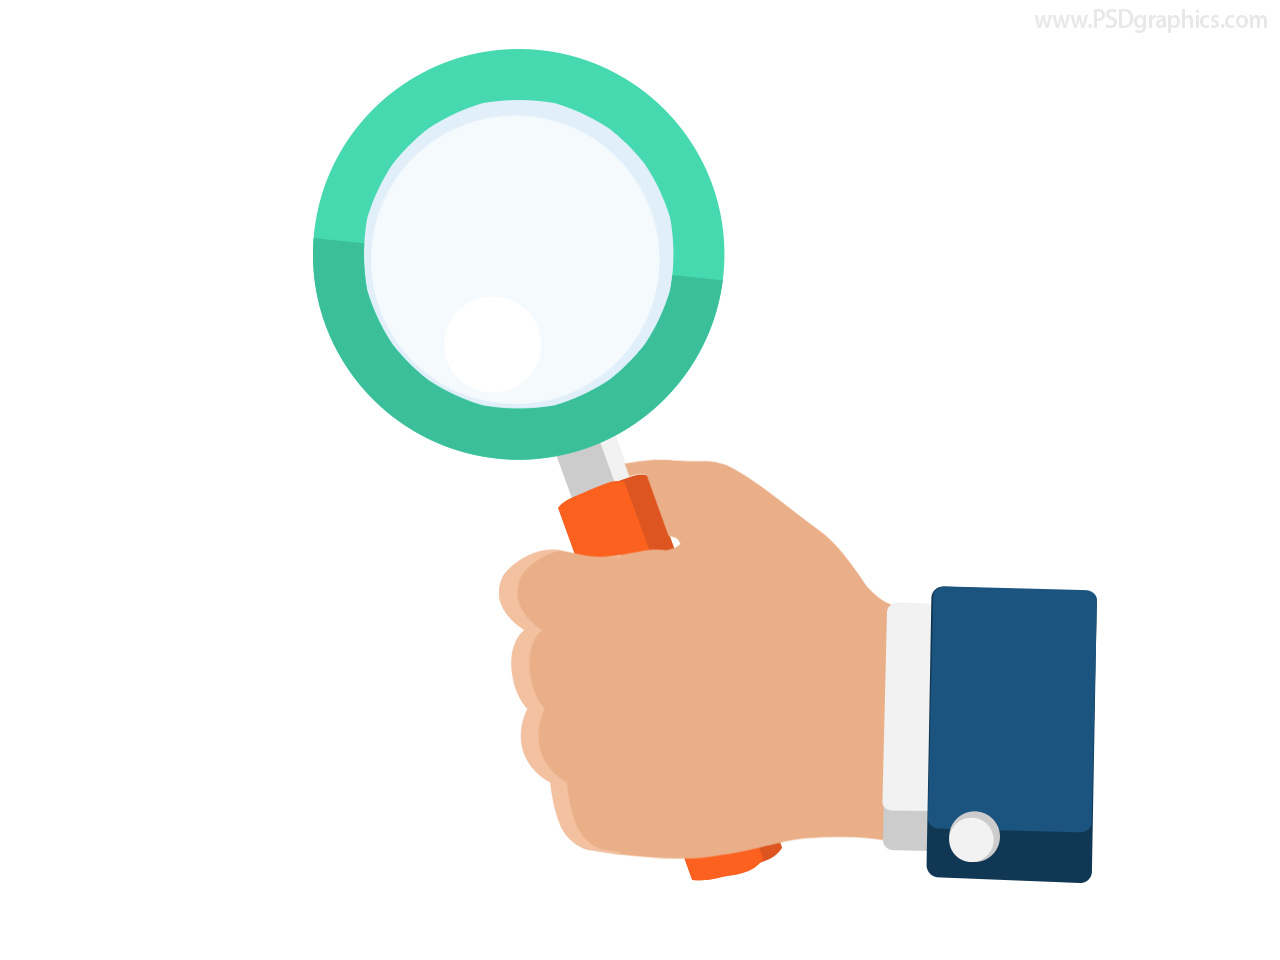 Search Icon Magnifying Glass Clip Art at  - vector clip 